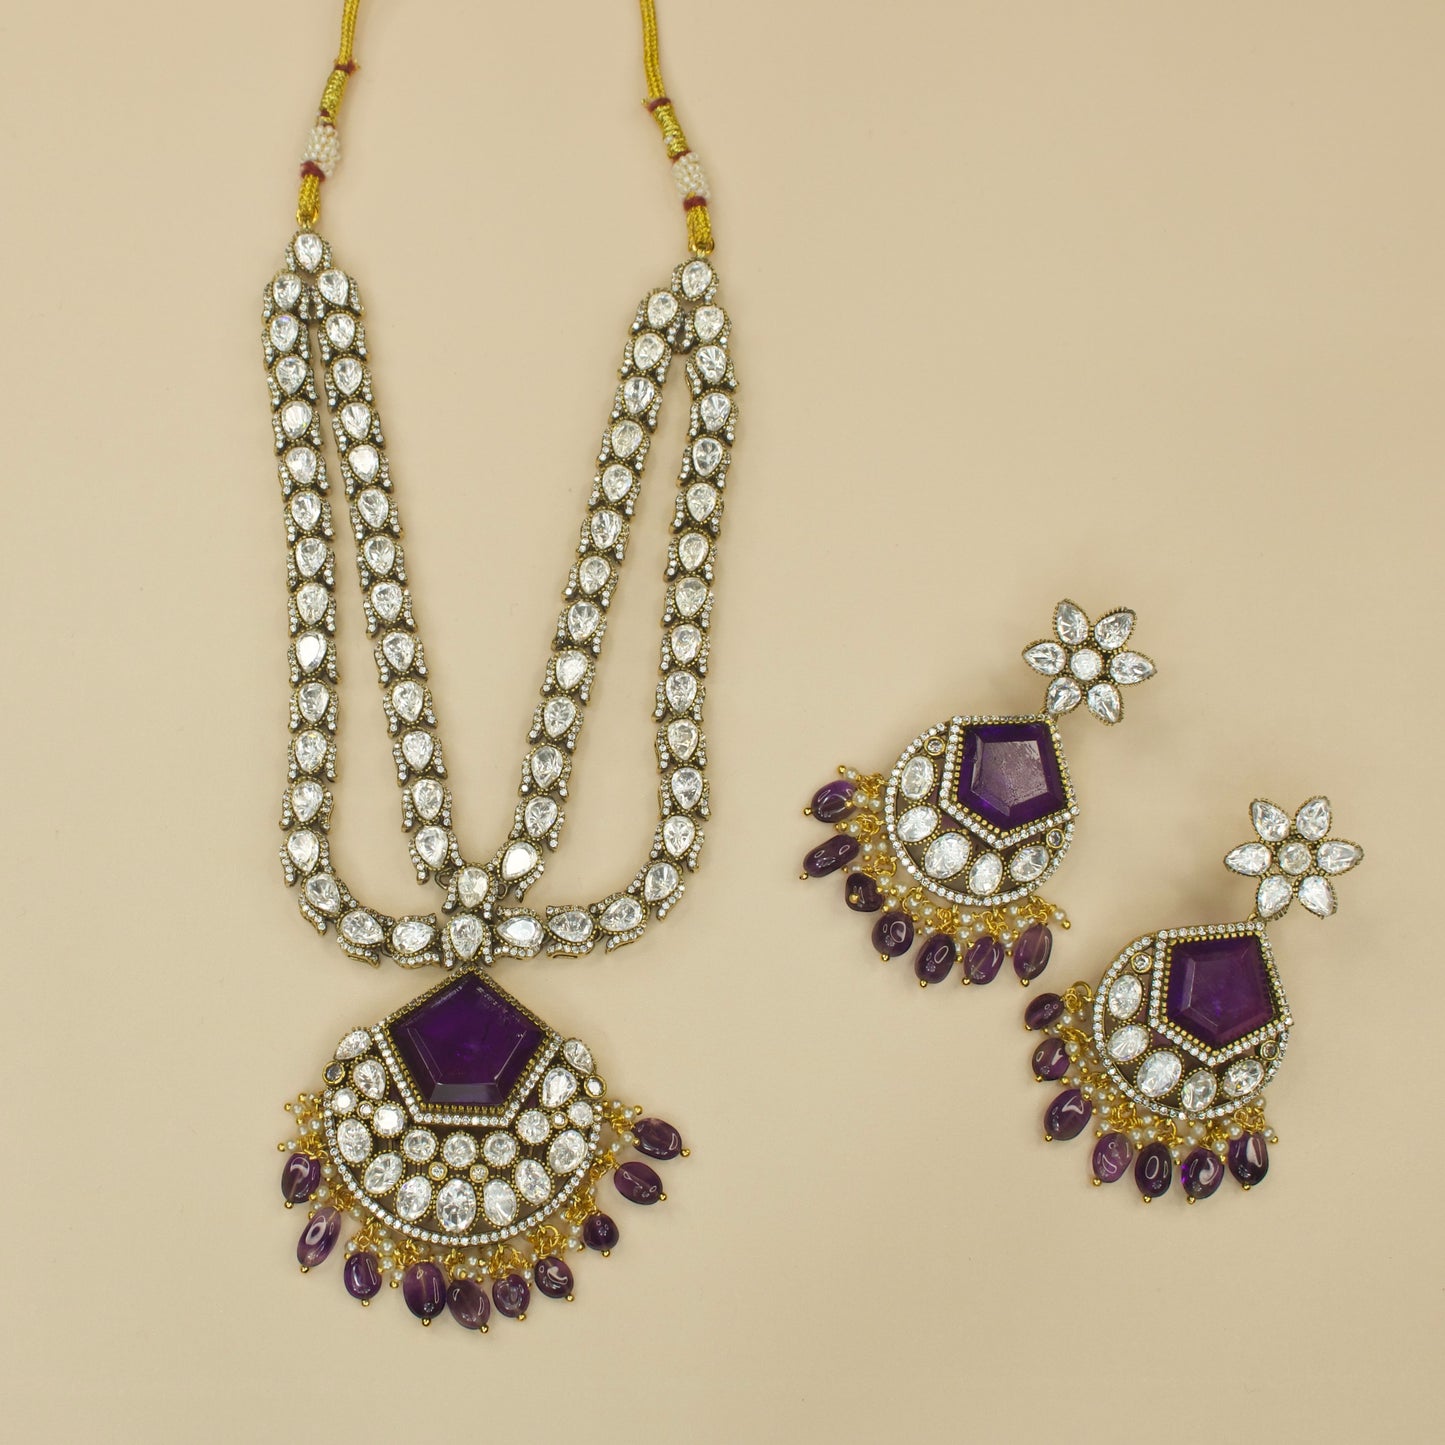 Alluring Two-Line Victorian Necklace Set